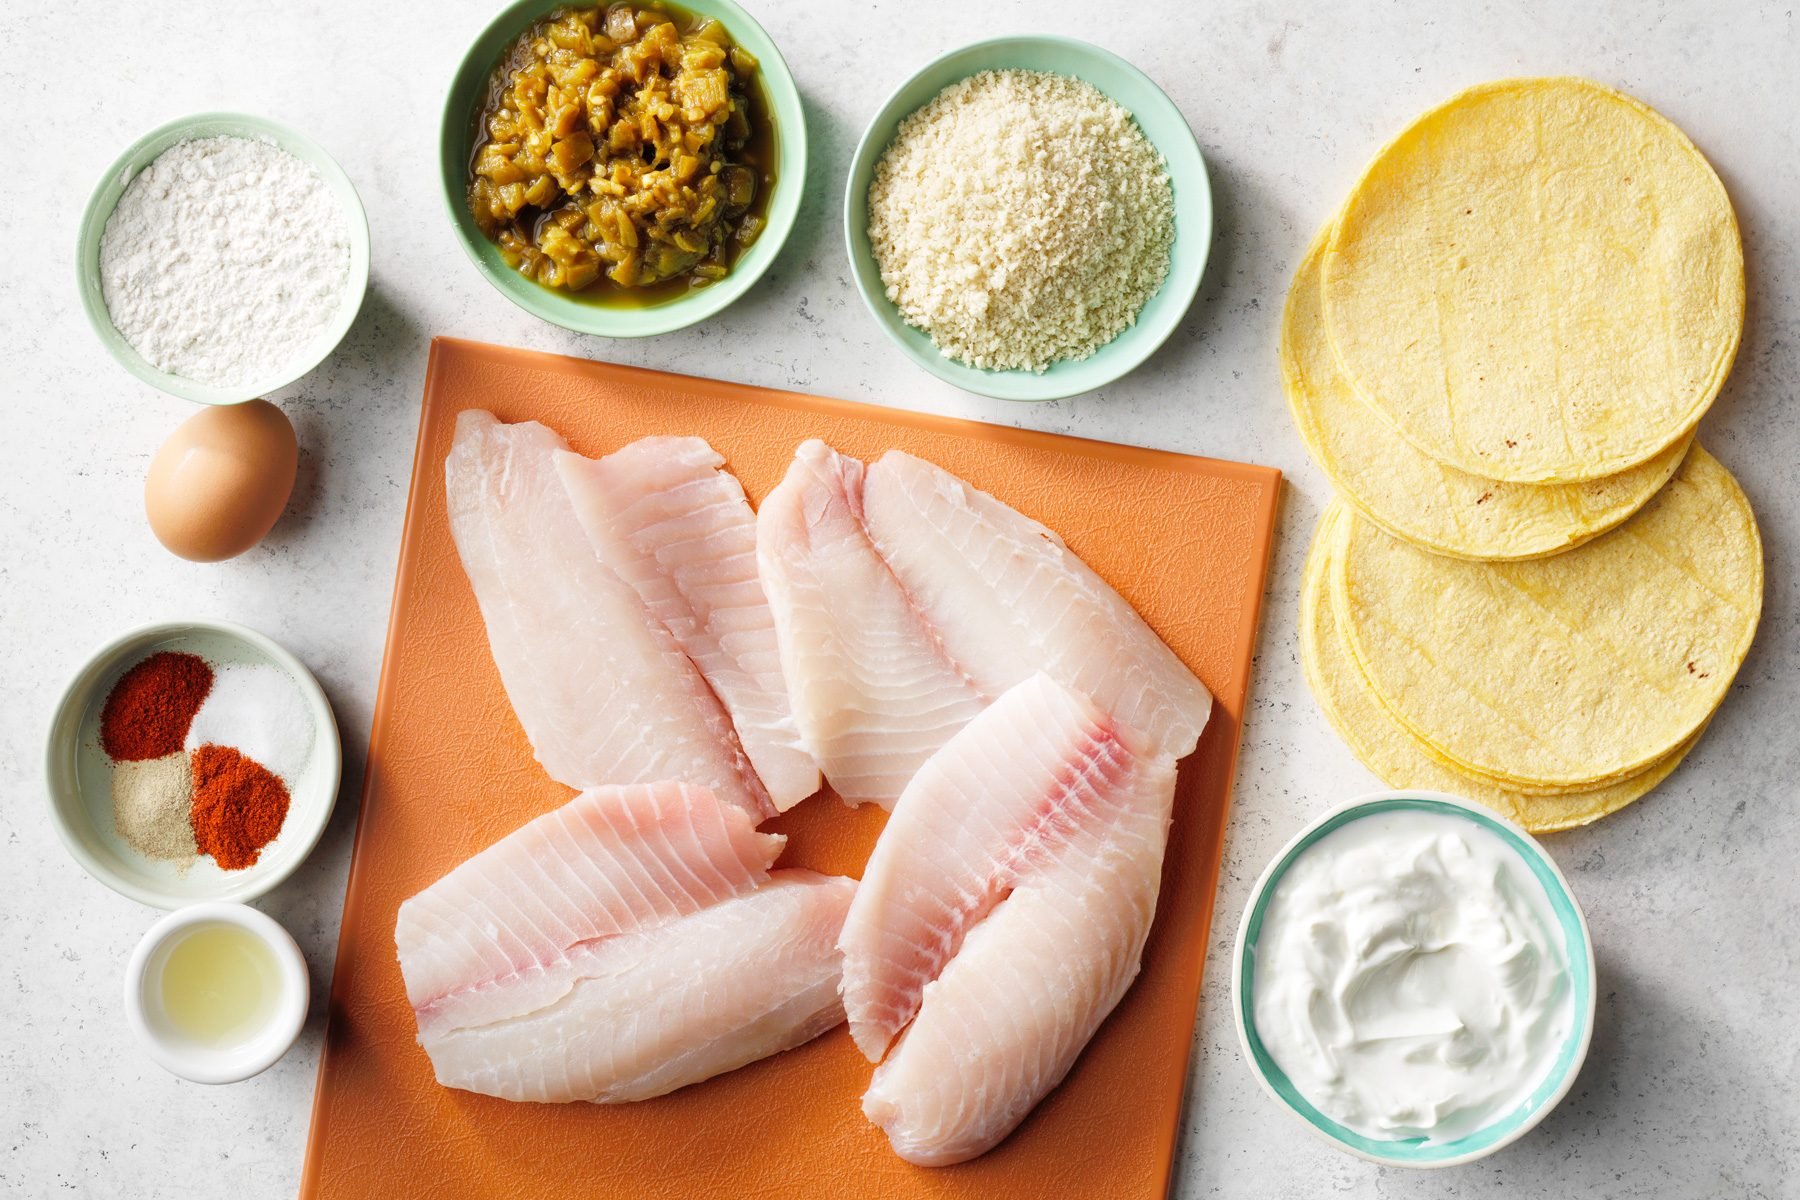 Tilapia fish, flour, bread crumbs, and other ingredients prepared for Air-Fryer Fish Tacos